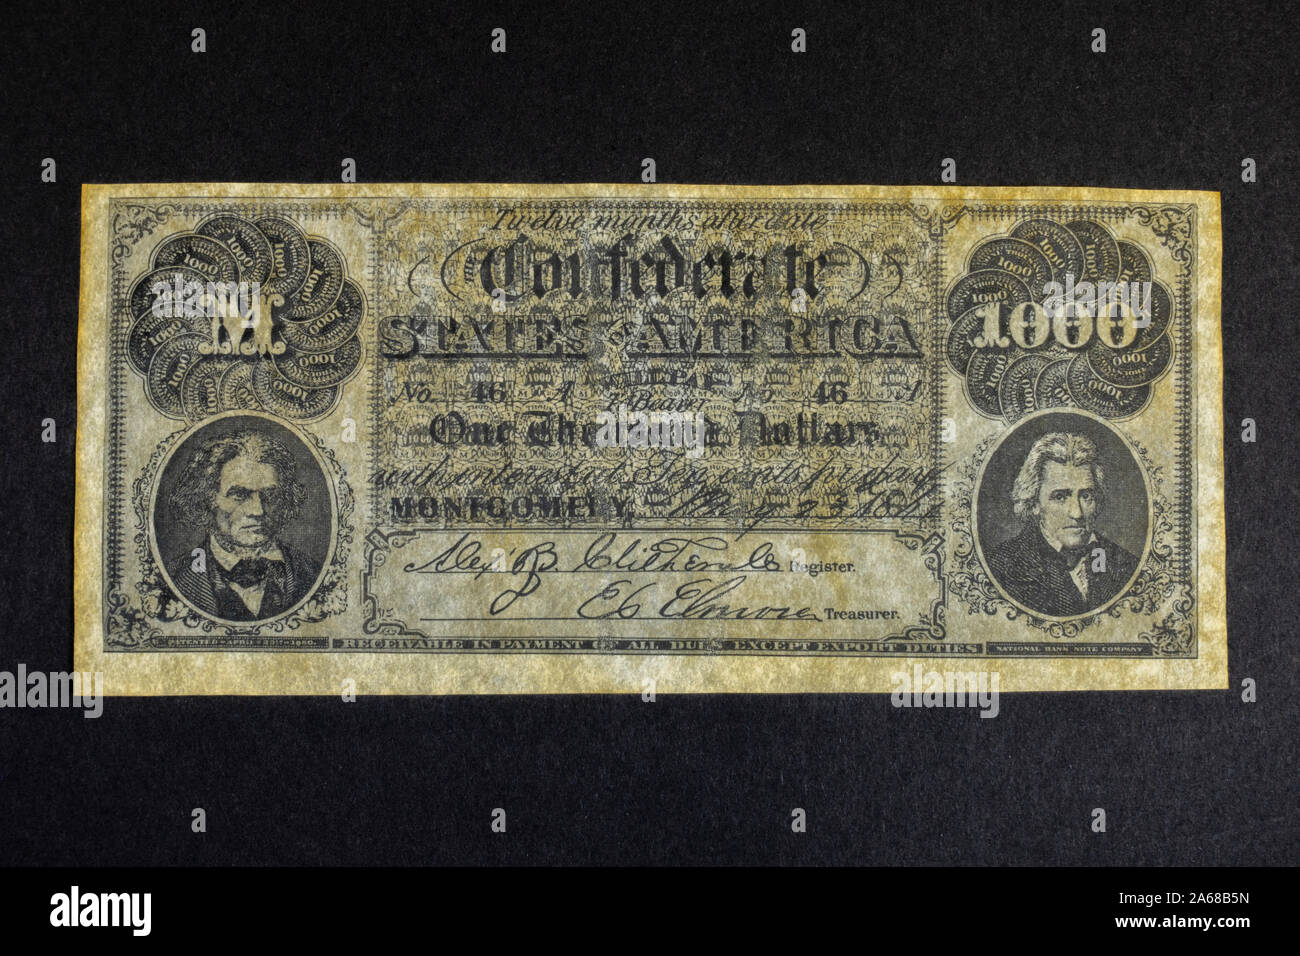 A replica 1861 one thousand dollar ($1000) bank note from the Confederate States of America (1861-65) Stock Photo